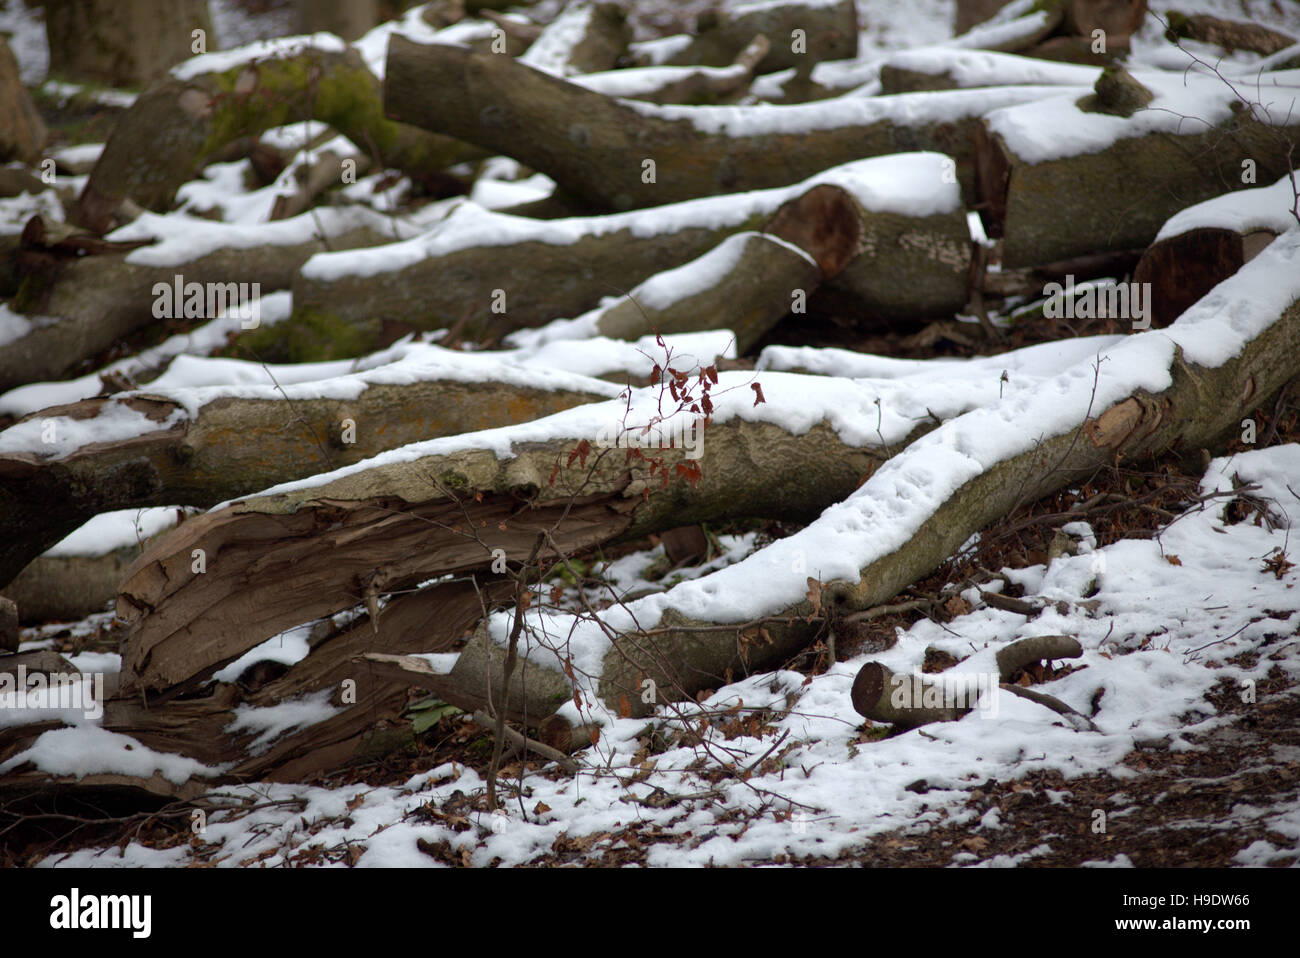 Snow covered logs or tree trunks or branches Stock Photo